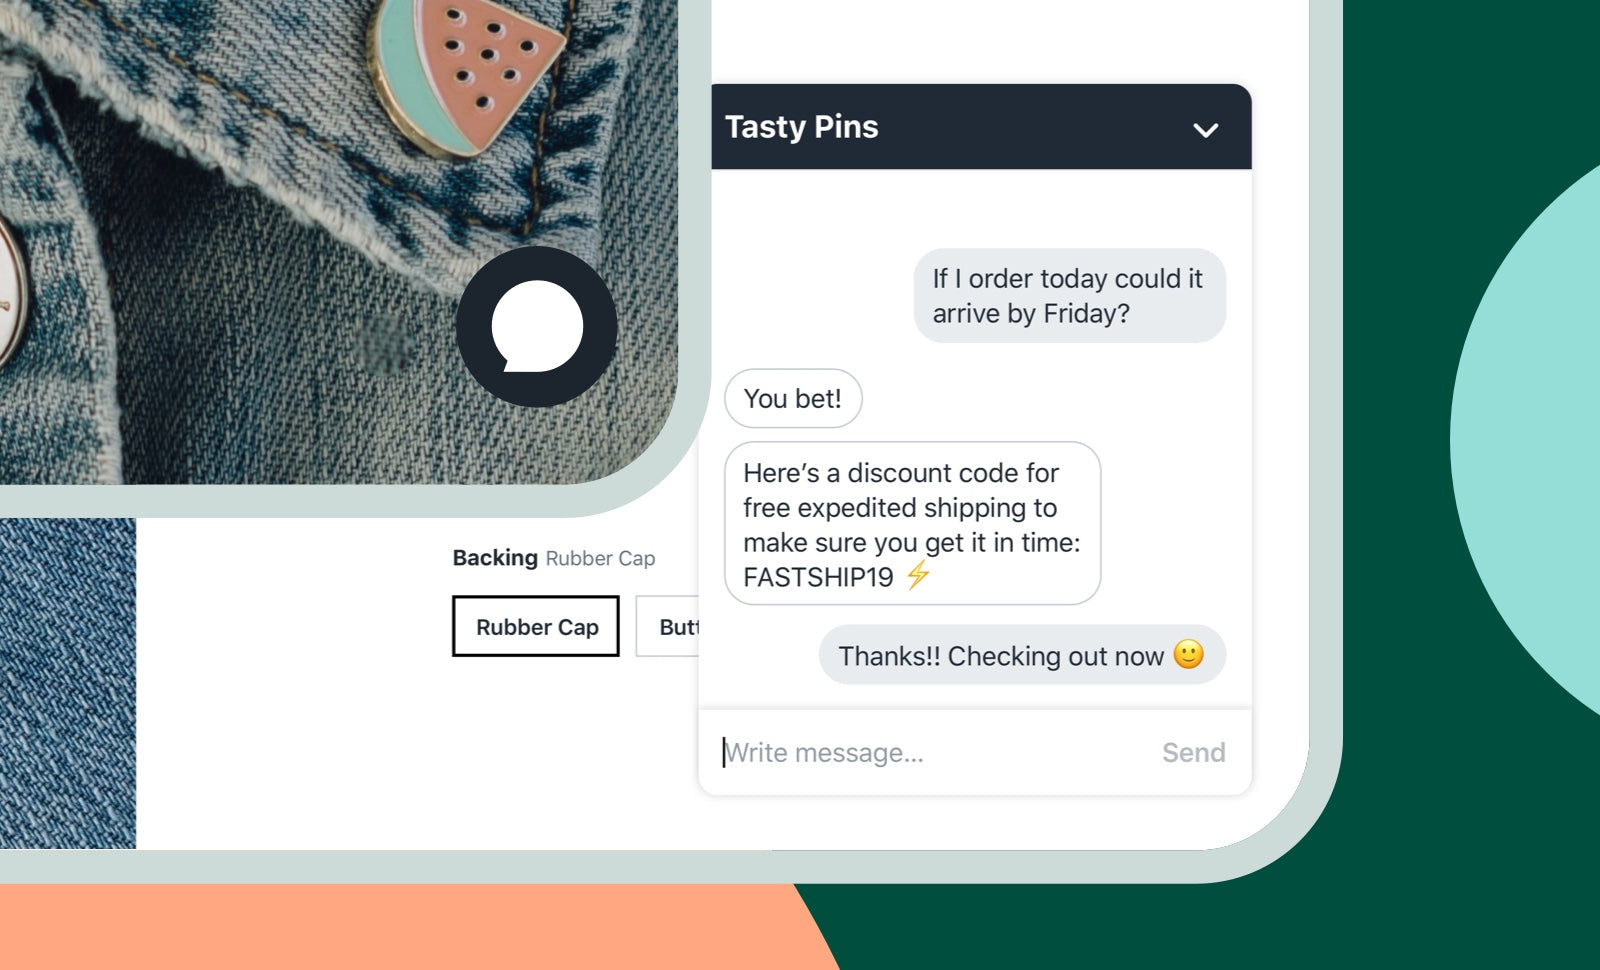 Live chat helps take customers from conversation to conversion